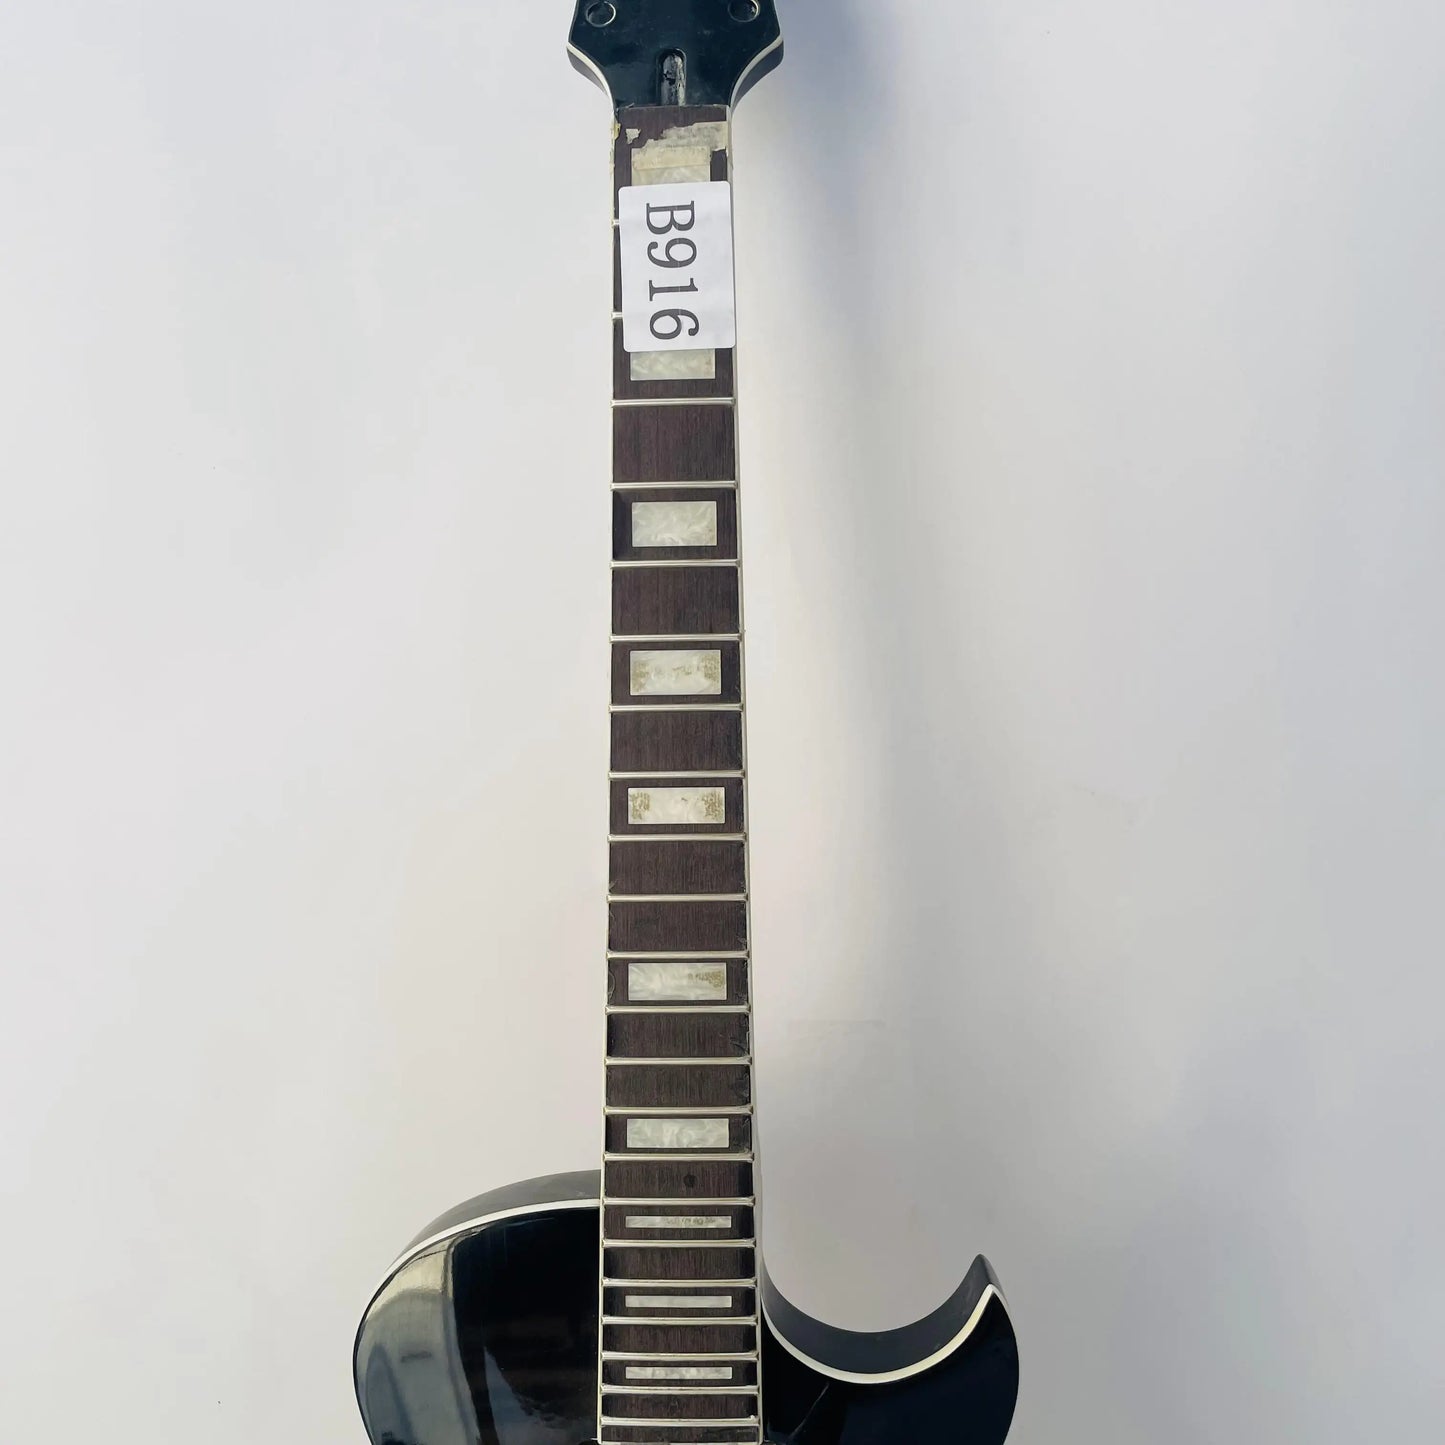 Ibanez Les Paul LP Style Guitar Quilted Maple Top Black Body with Neck, Rosewood Fingerboard